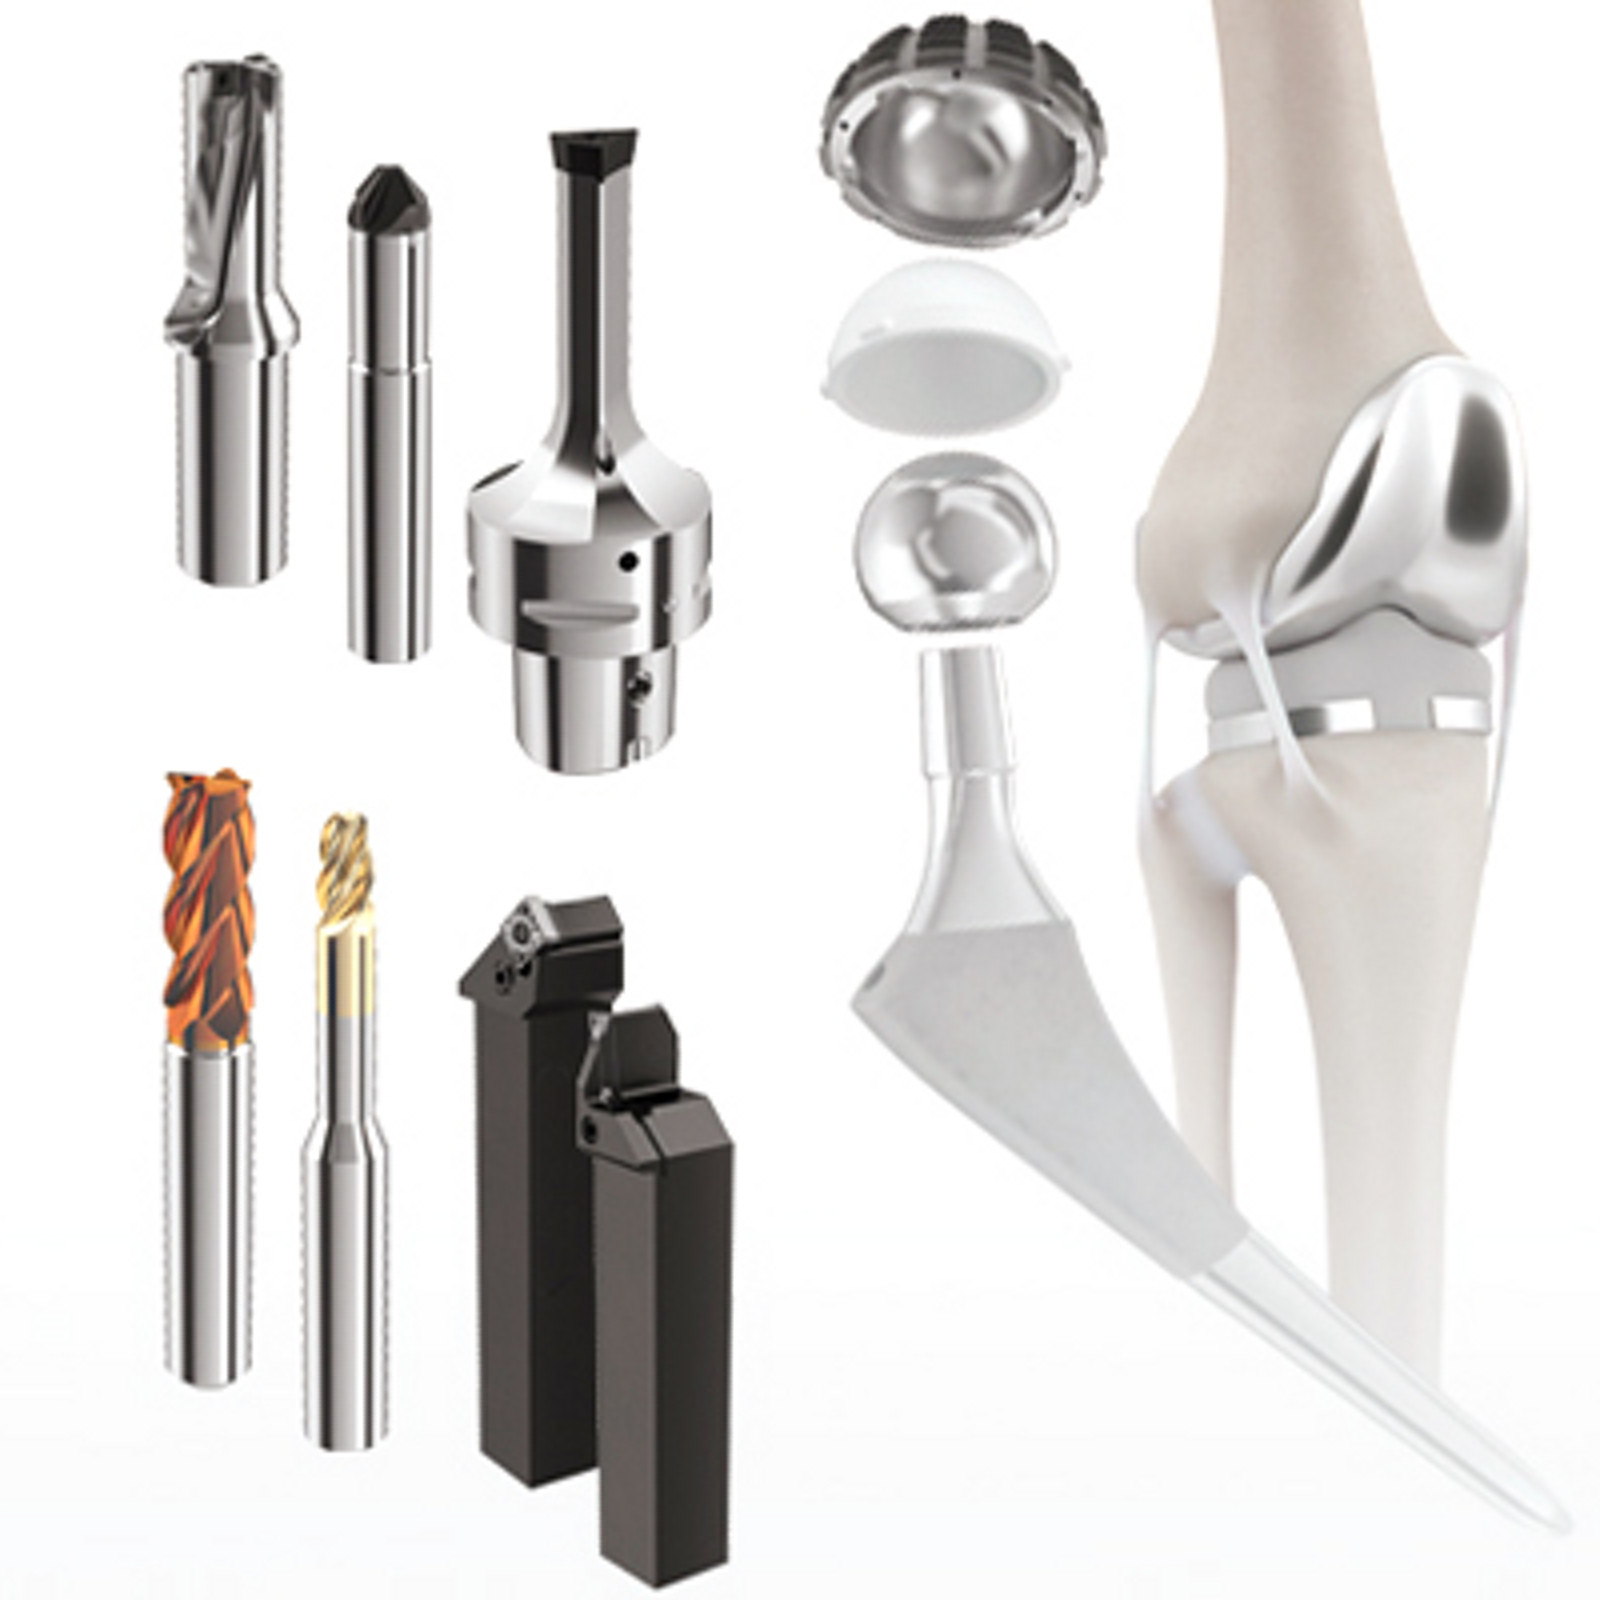 Cutting Tool Solutions for medical technology components